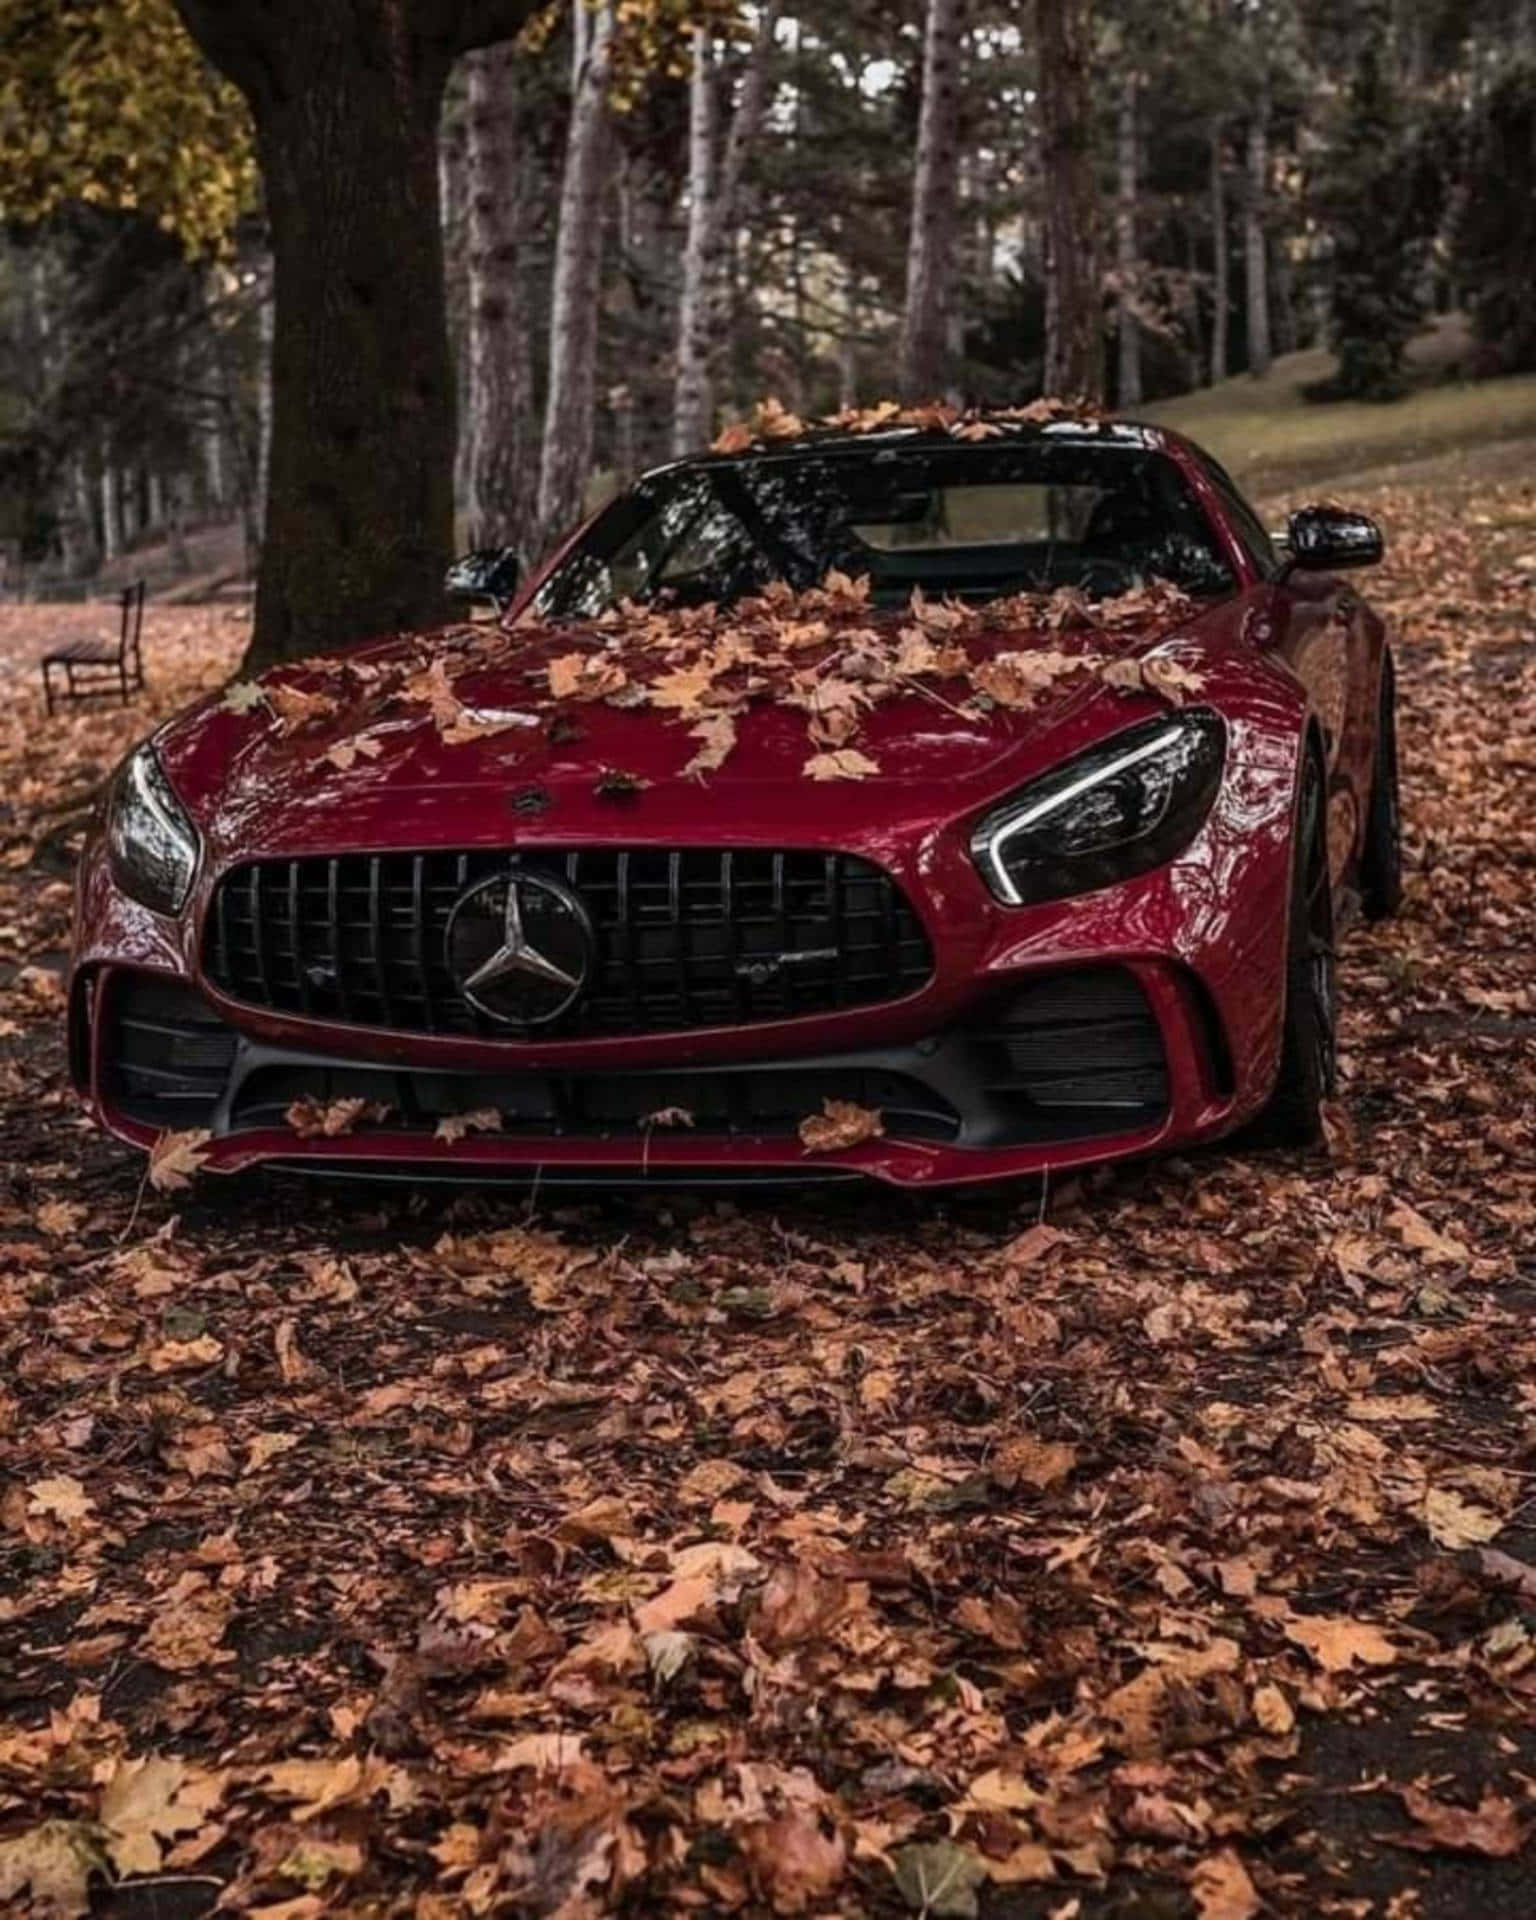 (Caption) Stunning Android AMG GT-R Background